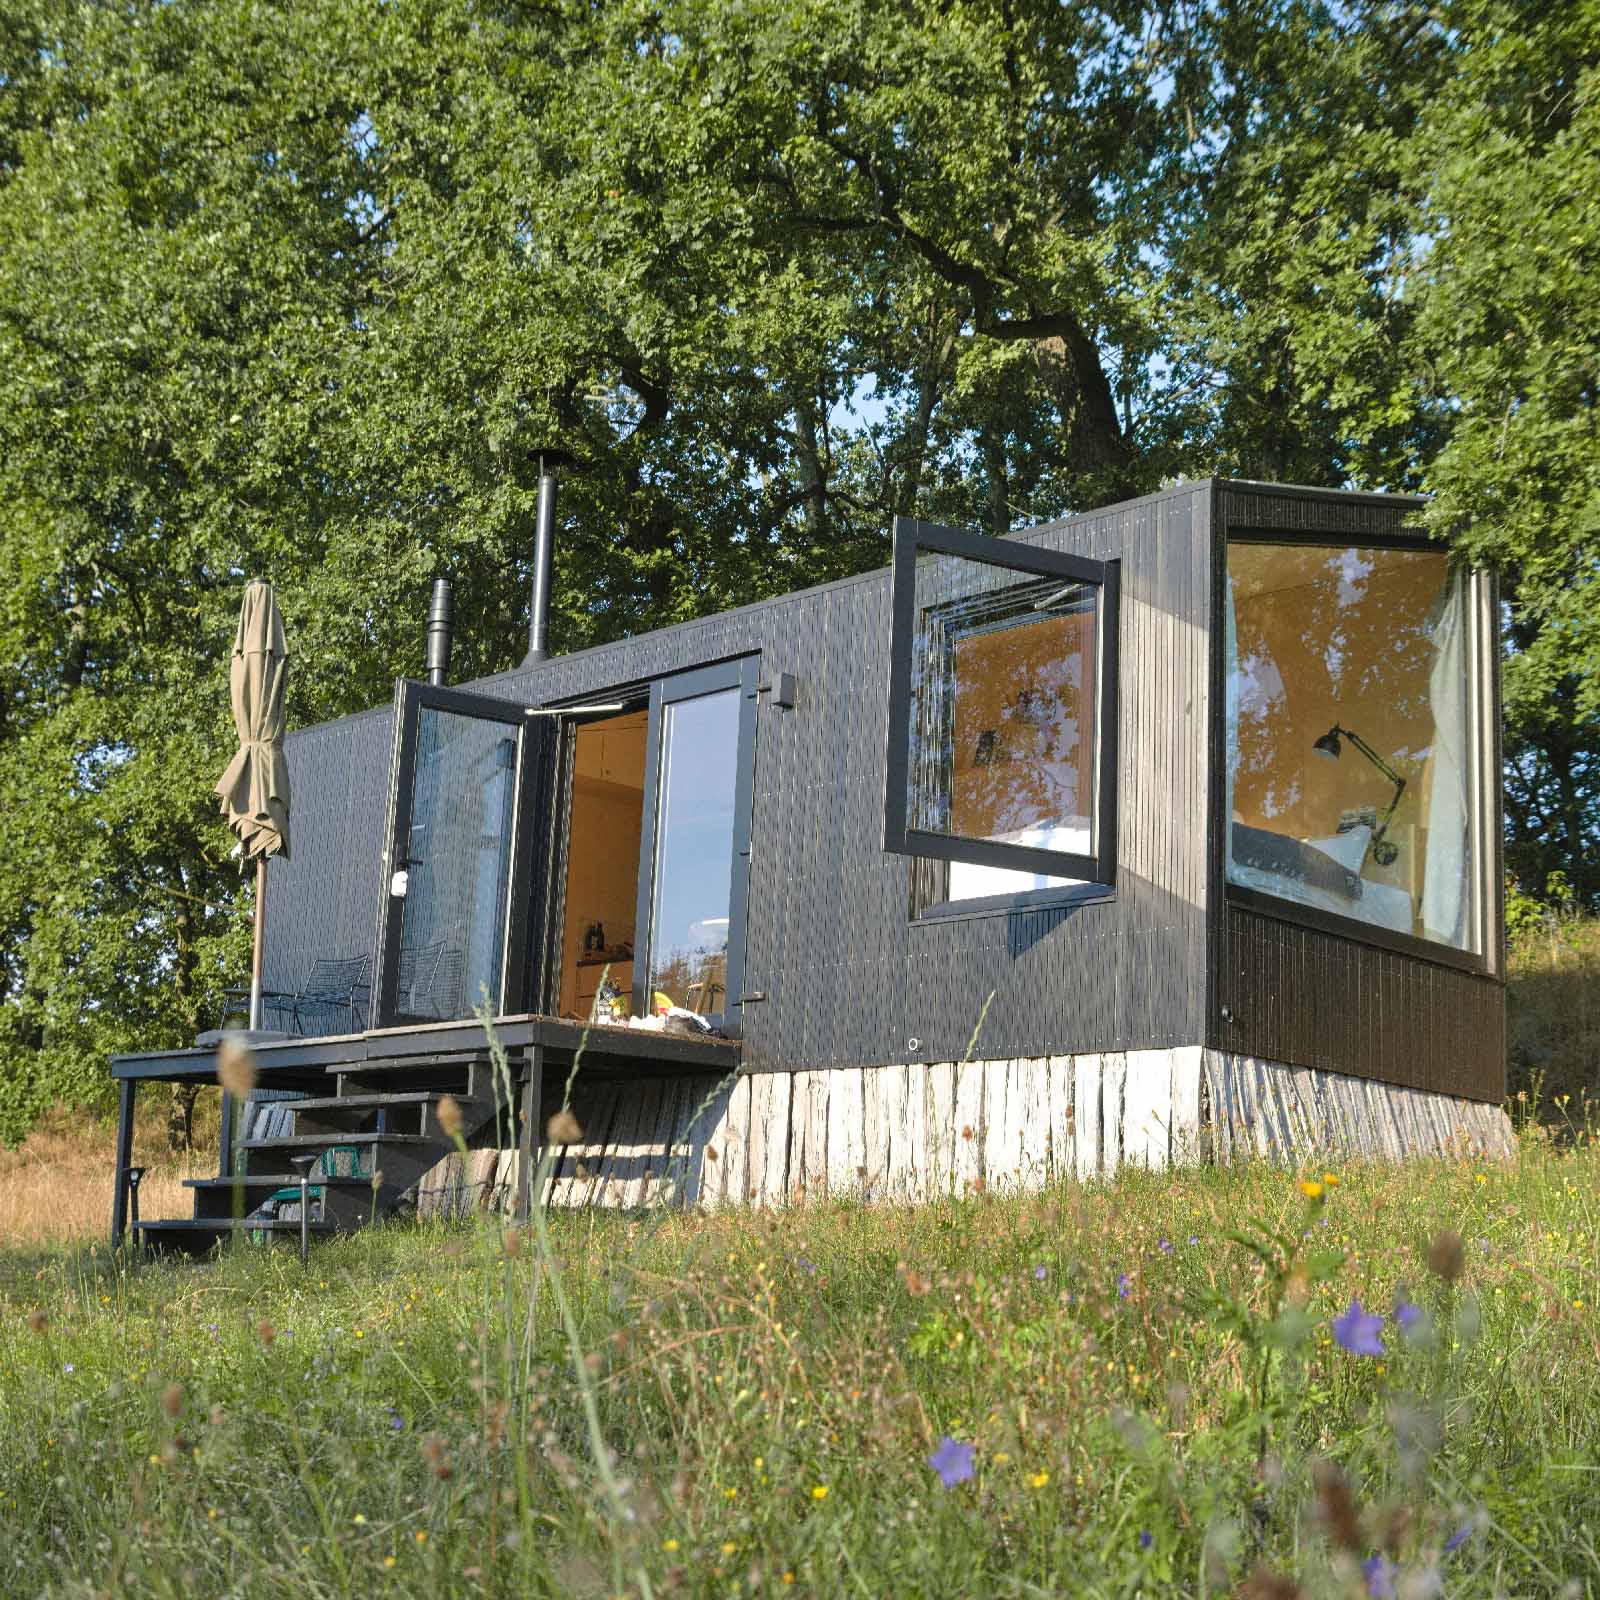 Tiny boxy home surrounded by wildflowers with trees behind it